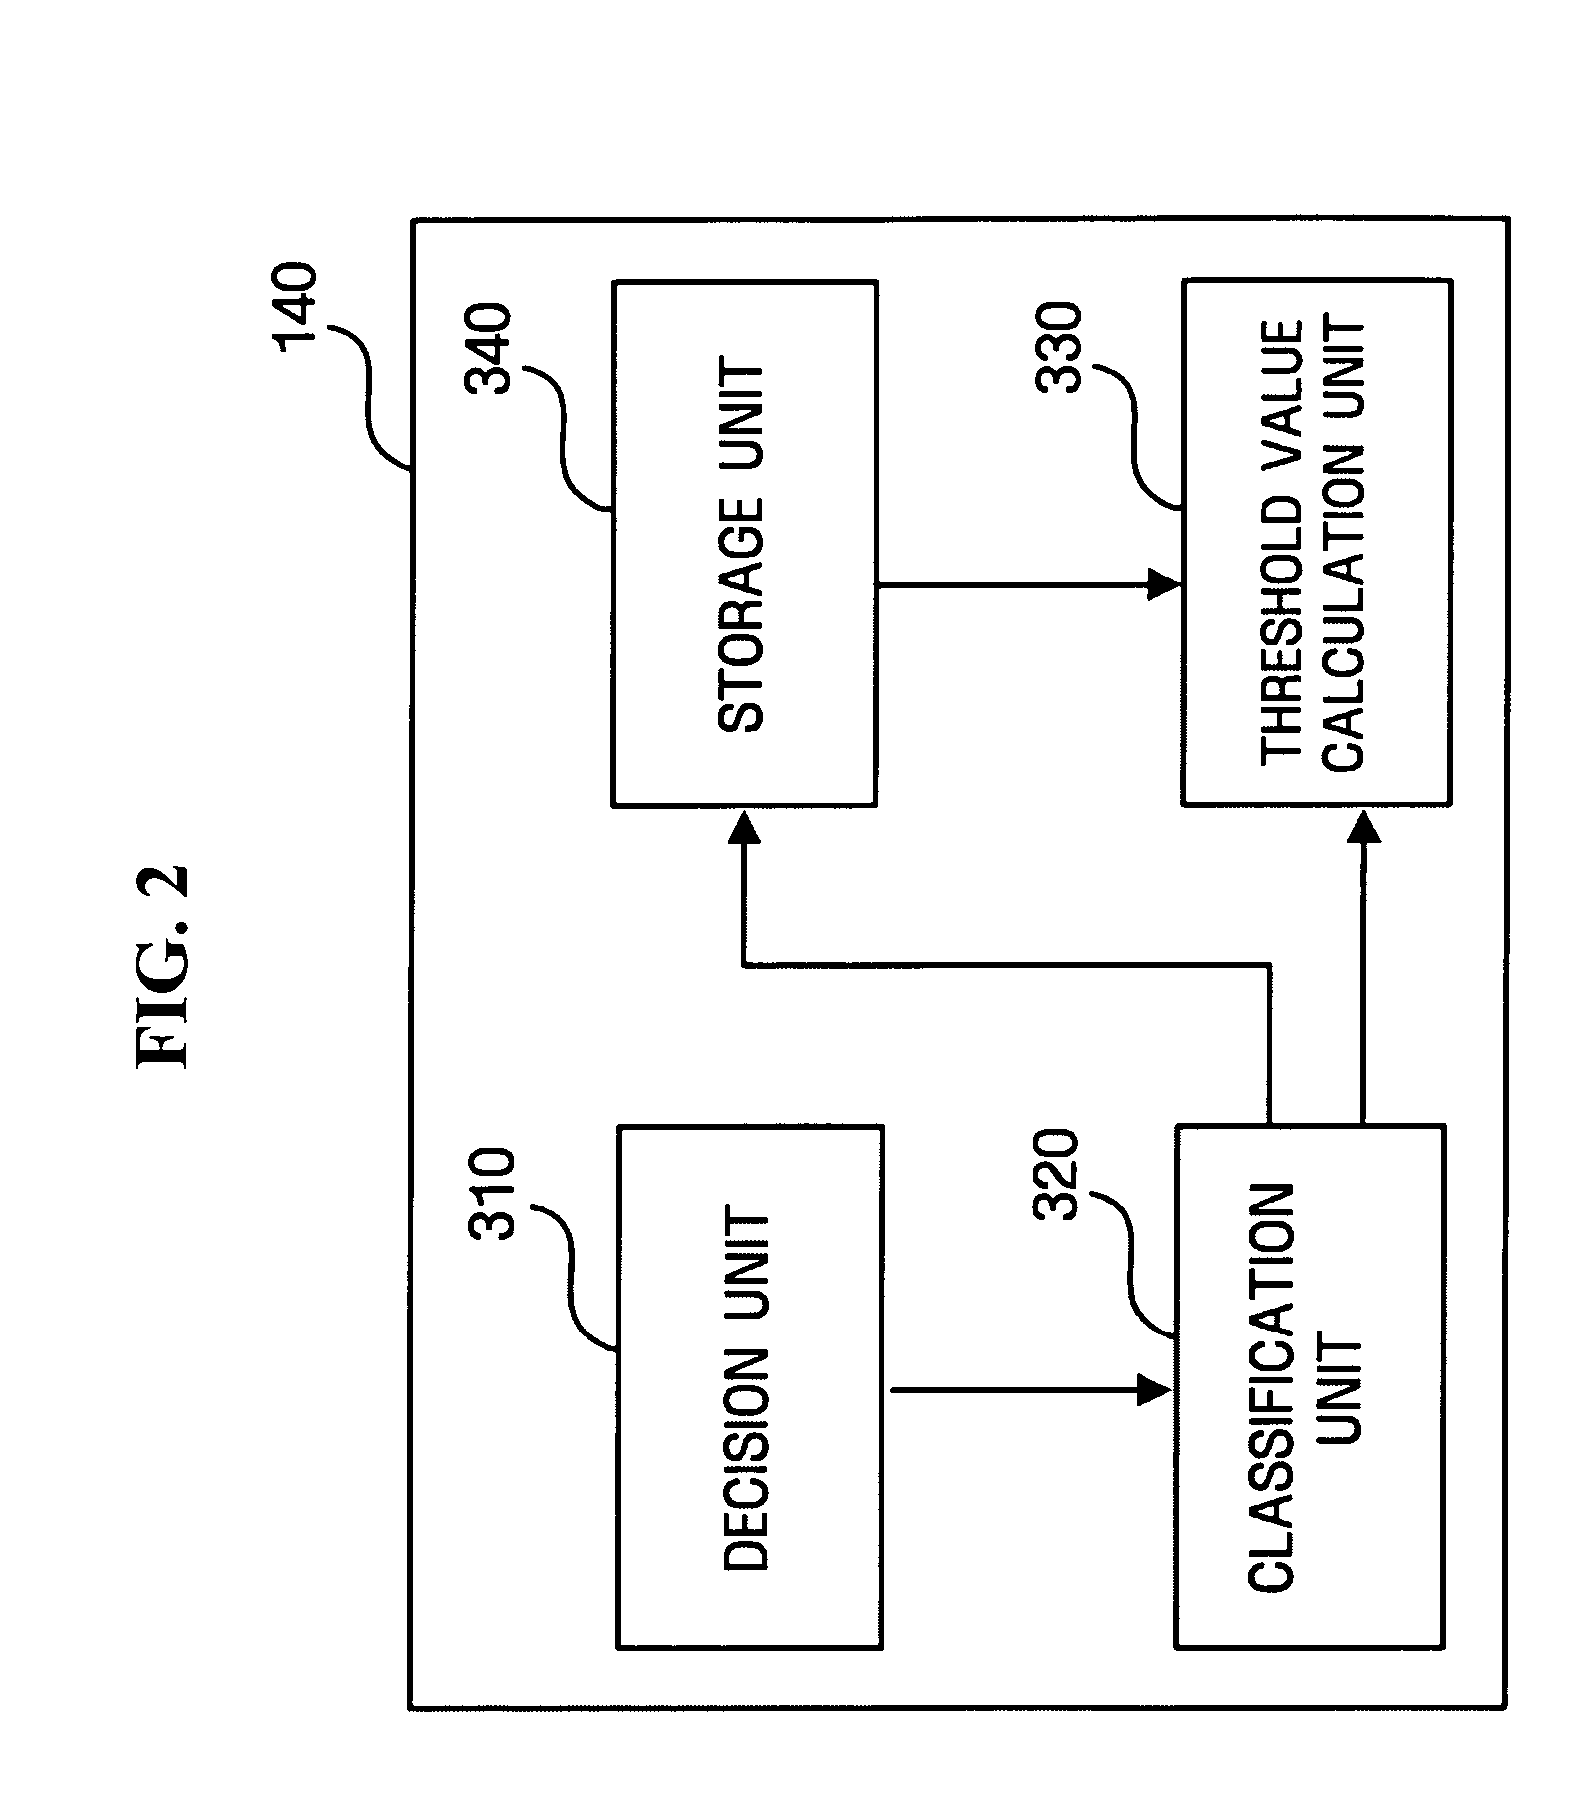 User adaptive speech recognition method and apparatus